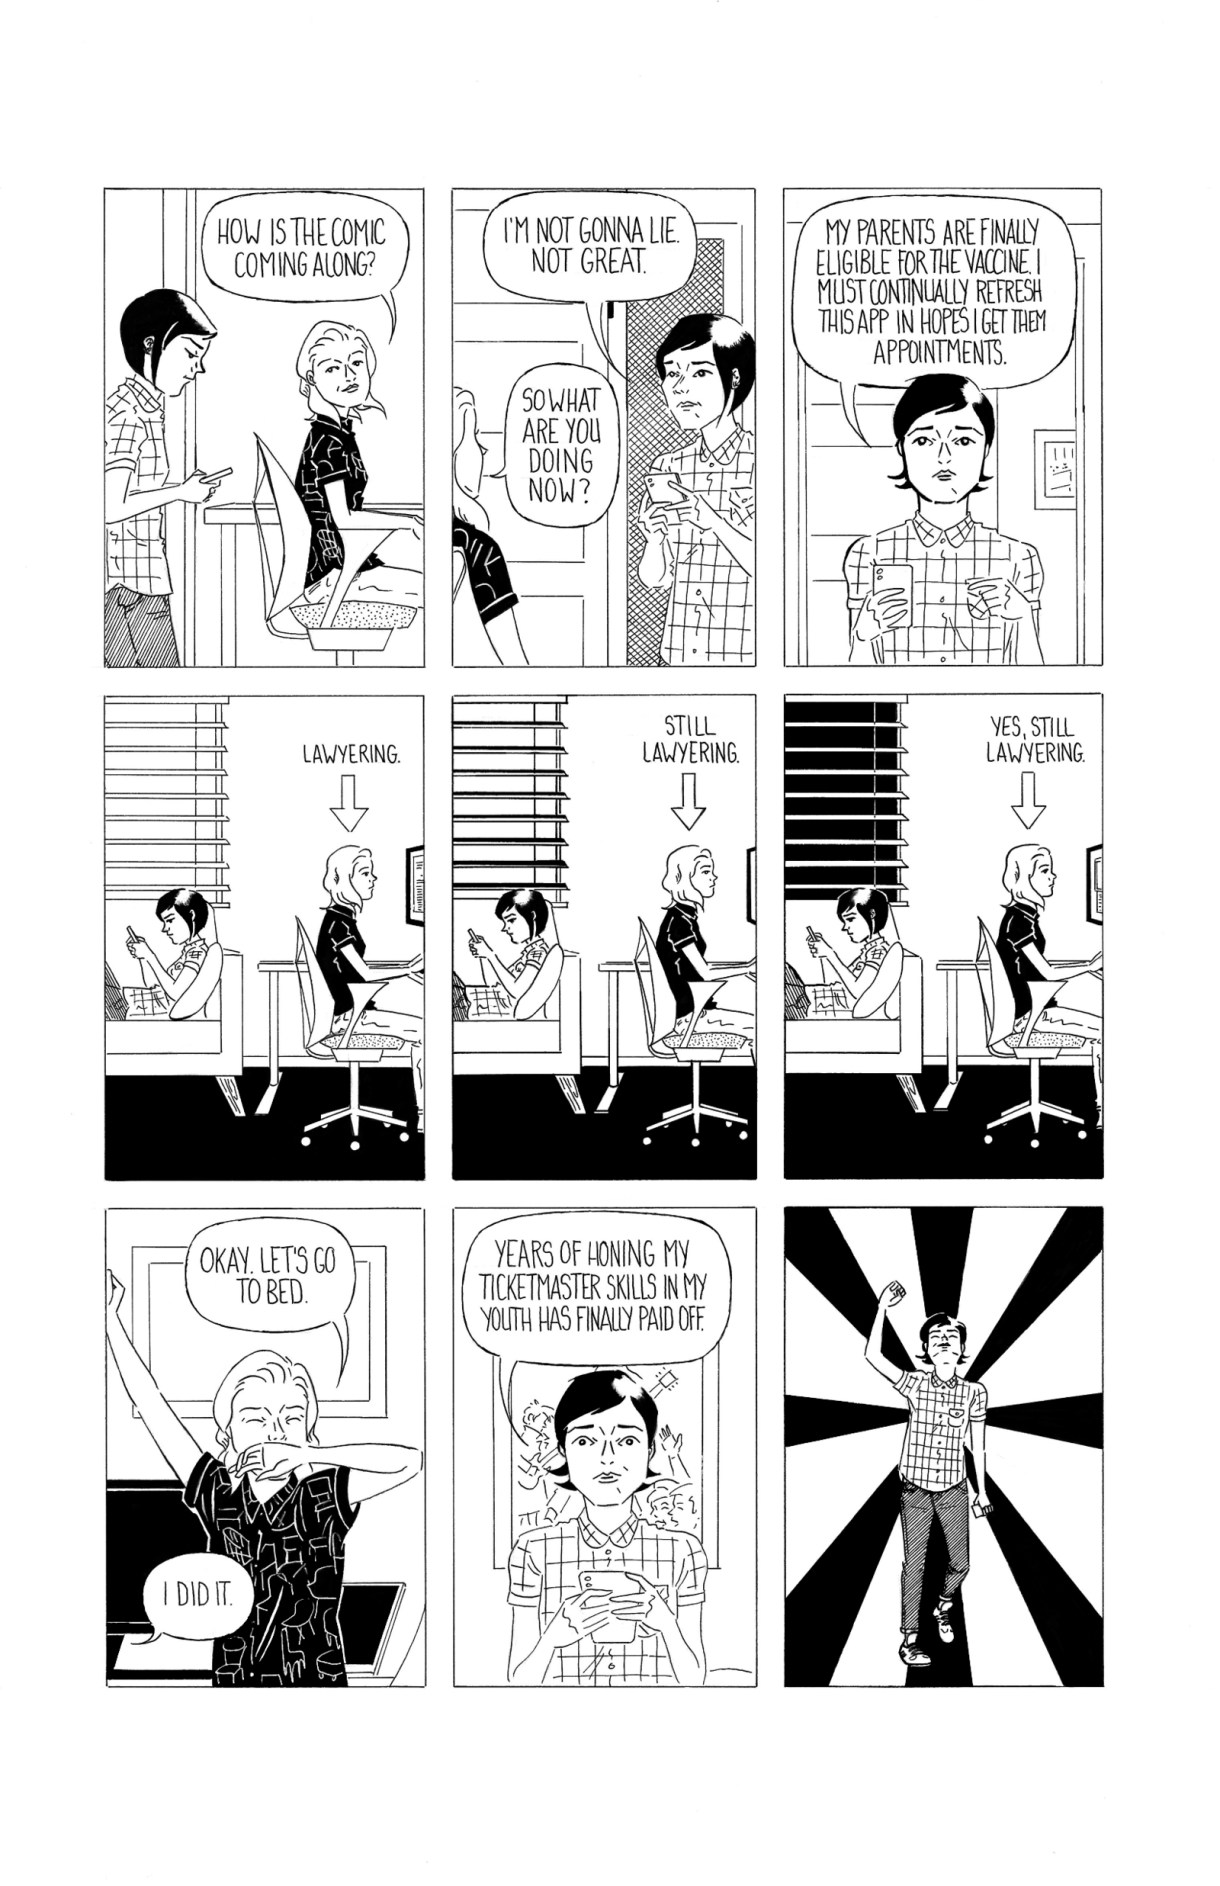 In a six panel, black and white, pen-drawn comic, Frida obsessively updates their phone while looking for a vaccine for their parents. Their partner does an entire workday as a lawyer, day turns into night, and Friday doesn't move from their task. Finally Frida triumphant! Fist pumping, they say "Years of honing my Ticketmaster skills as a youth paid off!" 